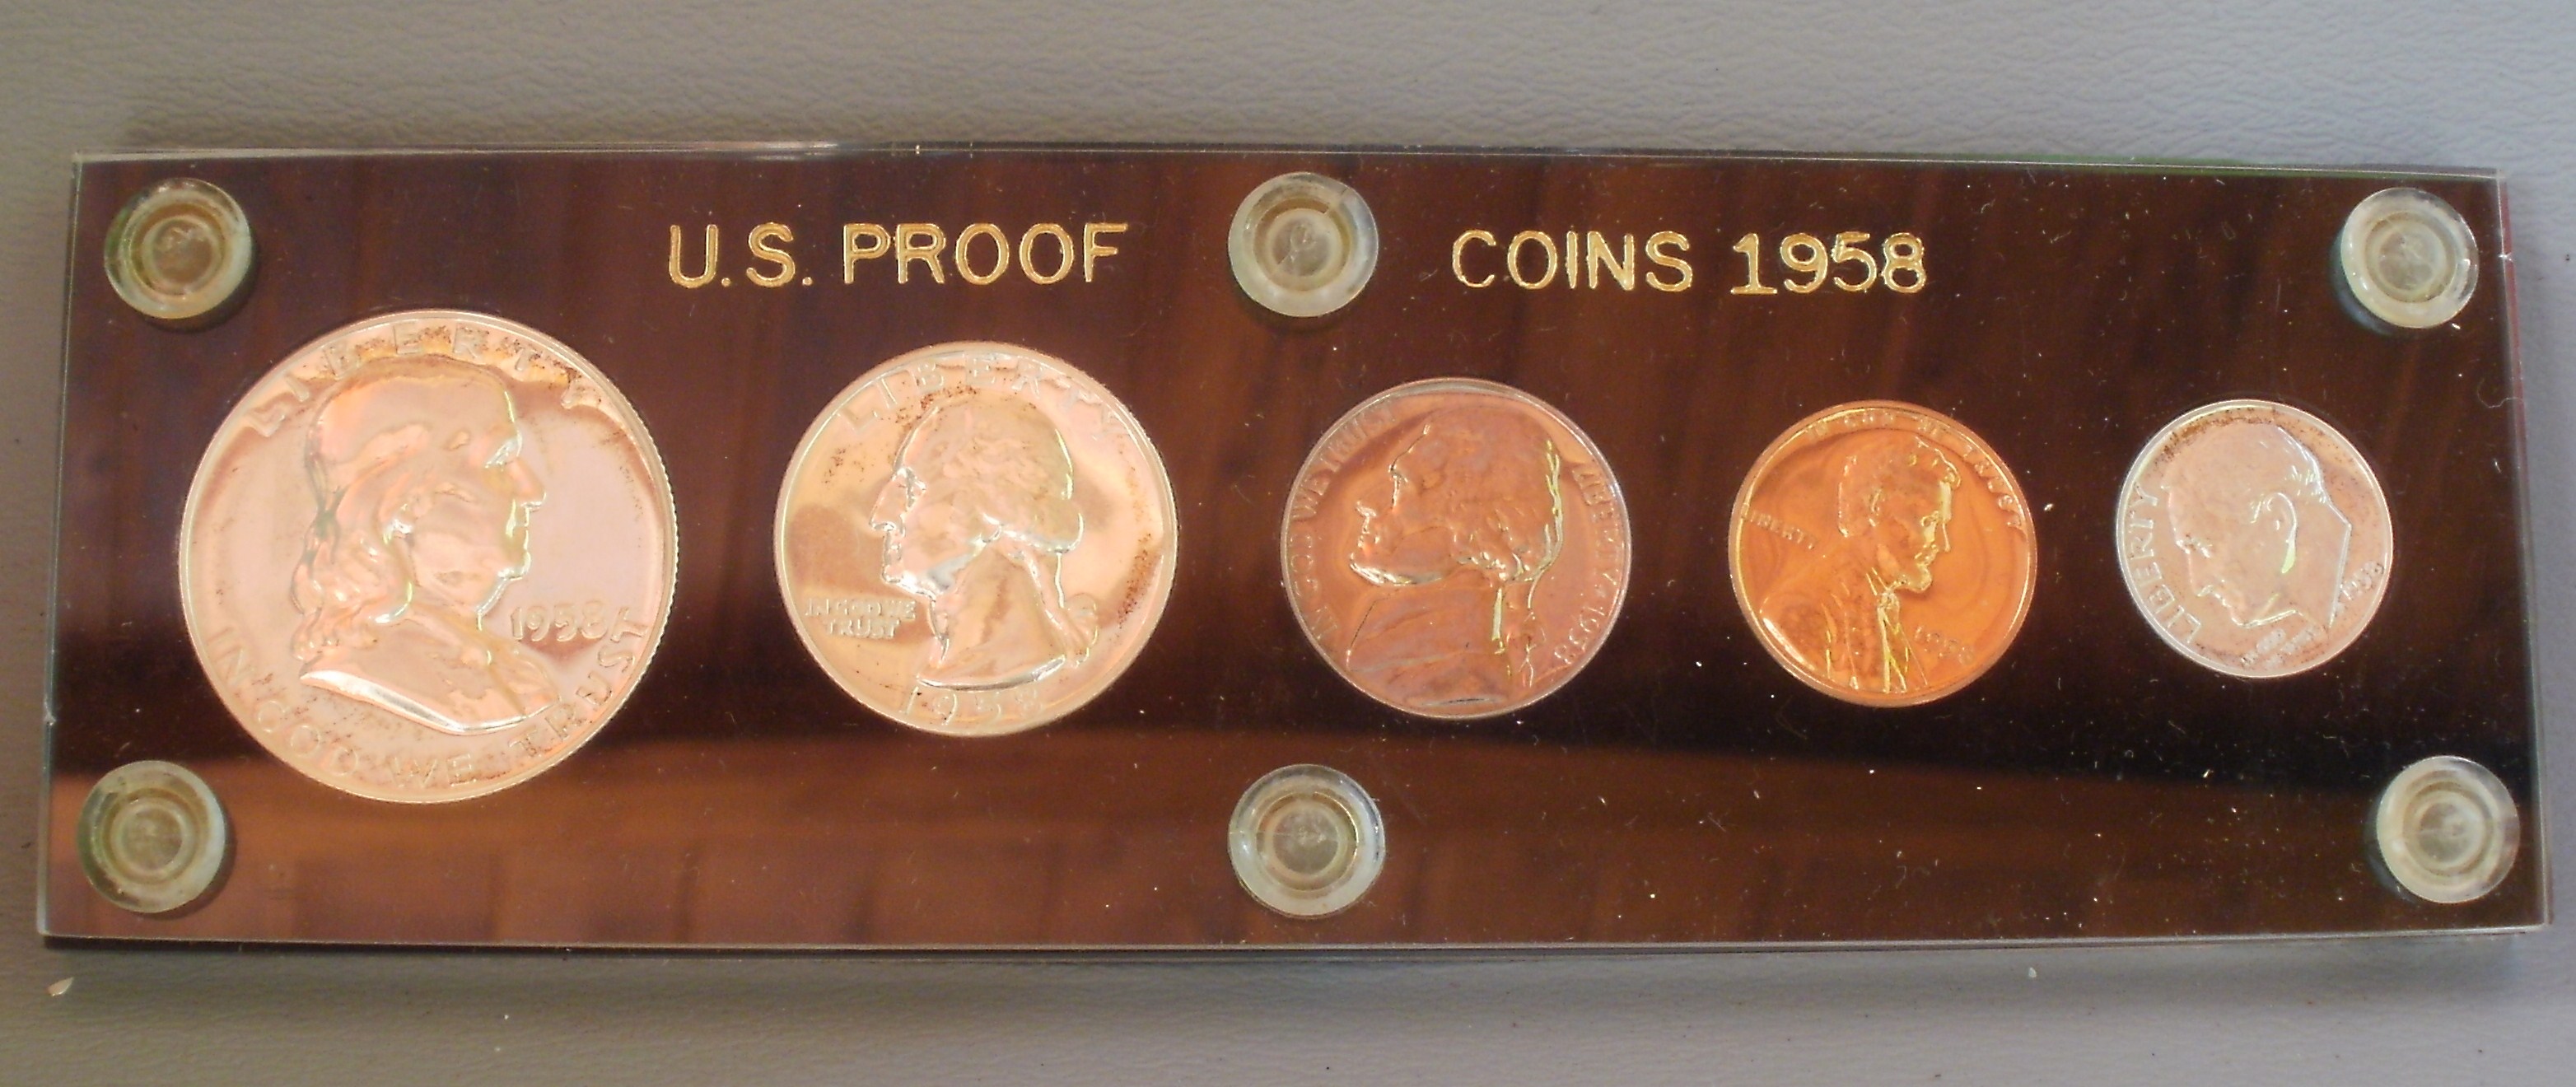 1958 US PROOF COIN SET